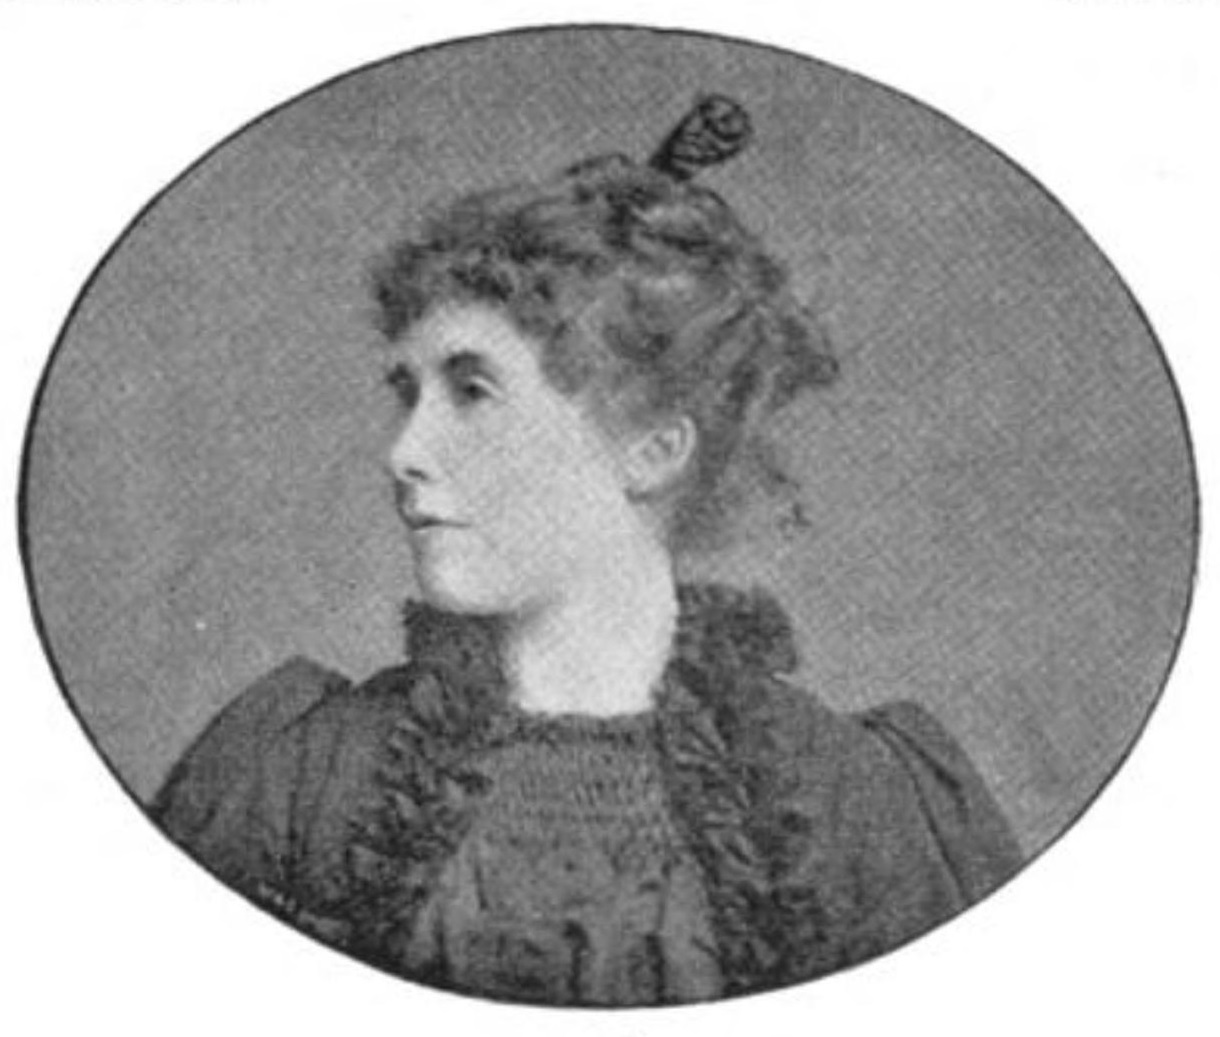 The black-and-white half-tone print is a head-and-shoulders view of Ella D’Arcy as a young woman, shown in three-quarter profile. Her hair is swept up to the top of her head and held with a decorative comb. She is wearing a dark dress with ruched neckline and puffed sleeves.